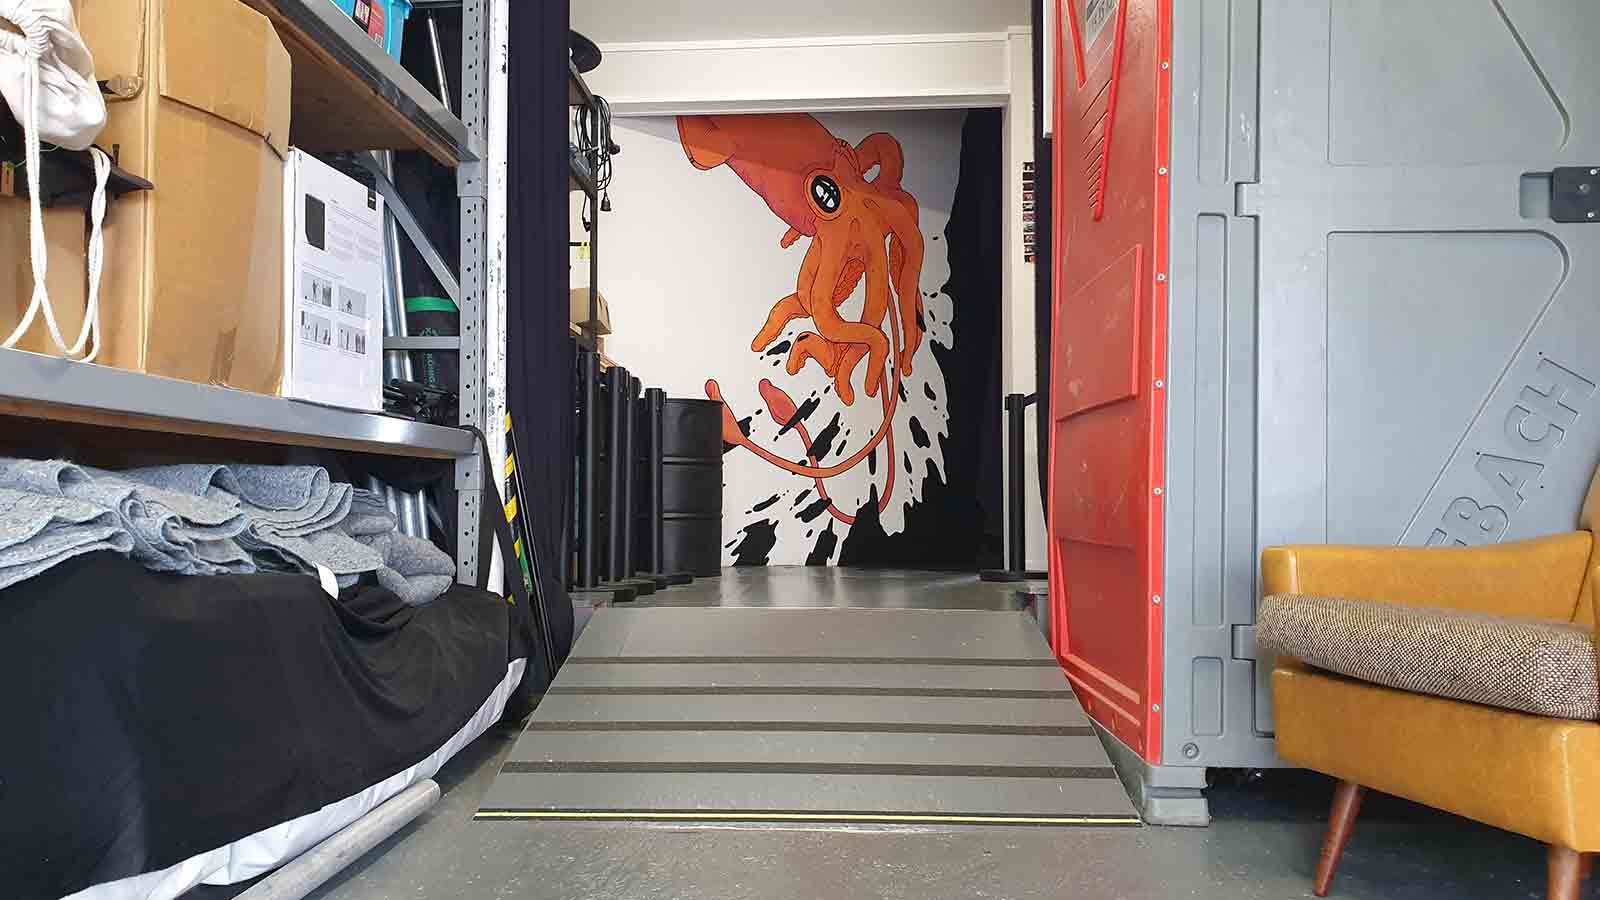 A corridor with storage shelfs either side leading toward an artistic image of a squid. Halfway along the corridoor is a ramp.